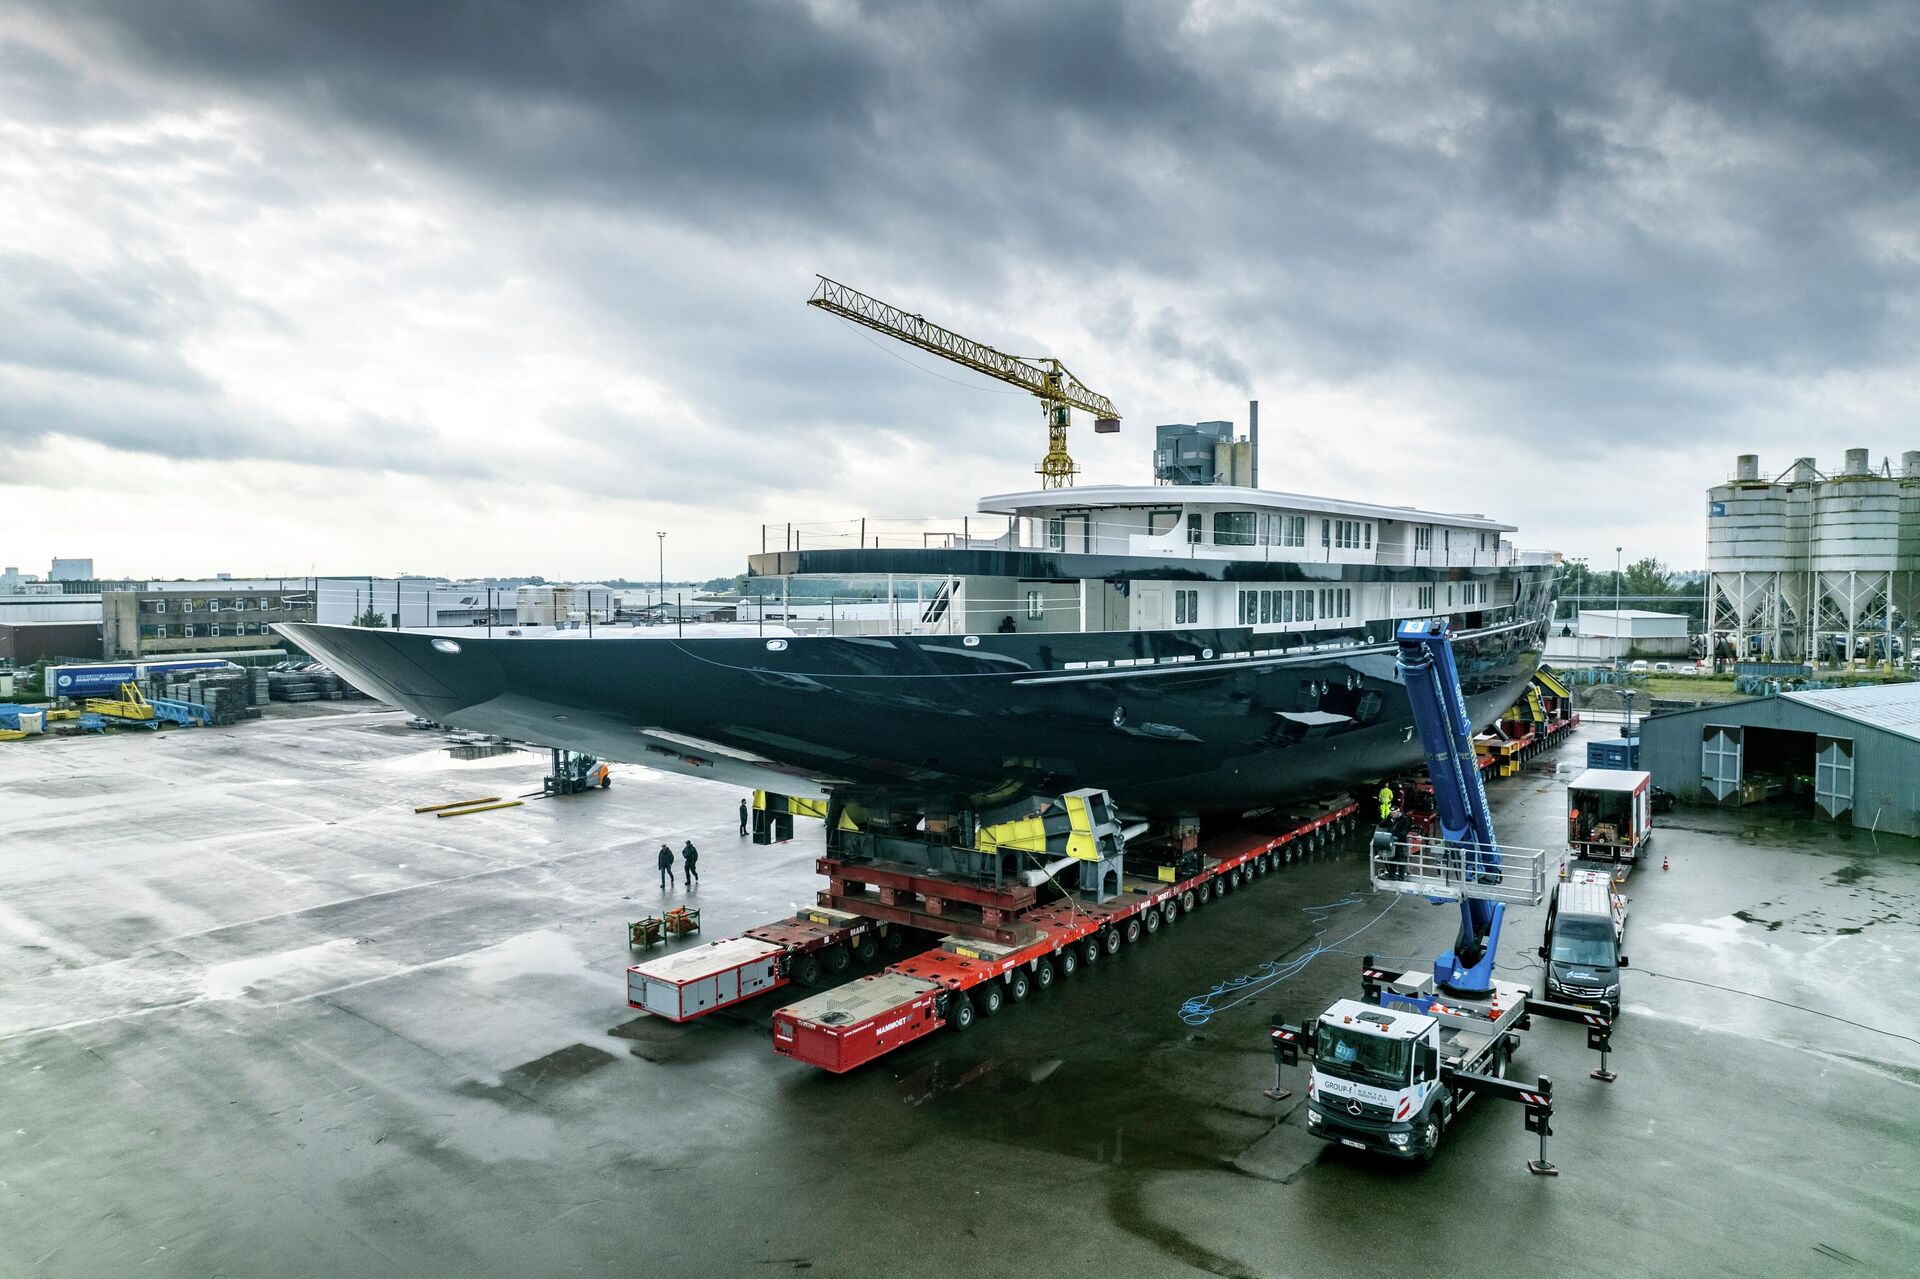 View of a yacht, reportedly being built for Amazon founder Jeff Bezos, on the wharf in Zwijndrecht, near Rotterdam, Netherlands, Wednesday, Oct. 21, 2021. A plan to dismantle a historic bridge in the heart of Dutch port city Rotterdam so that the huge yacht can get to the North Sea is unlikely to be plain sailing. Reports this week that the city had already agreed to take apart the recently restored Koningshaven Bridge, known locally as De Hef sparked anger in the city, with one Facebook group set up calling for people to pelt the multimillion dollar yacht with rotten eggs. - Sputnik International, 1920, 03.07.2022